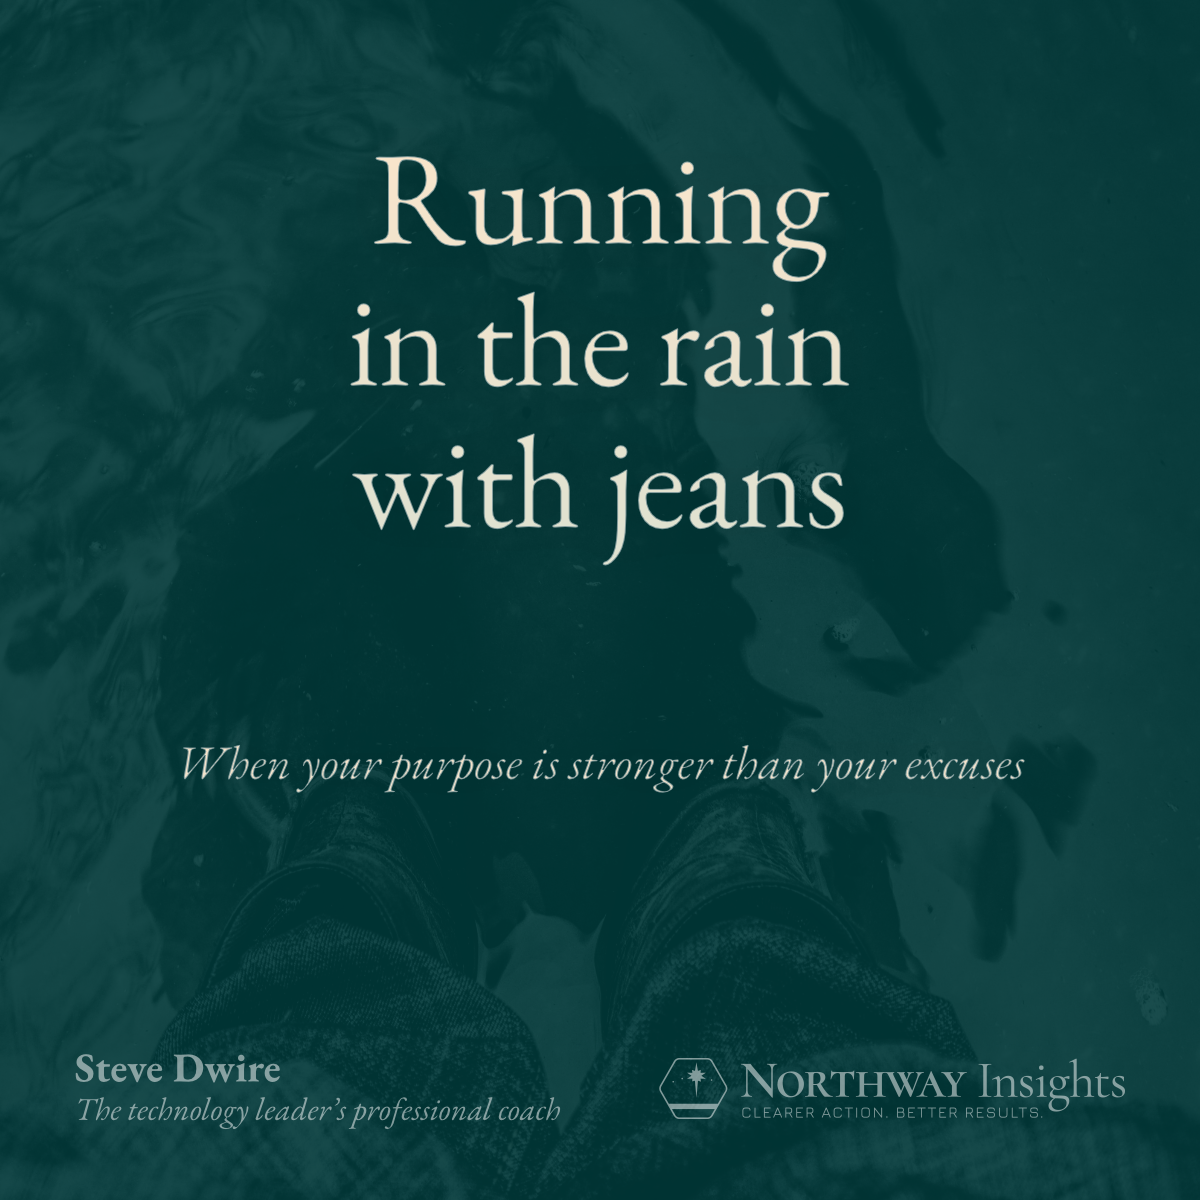 Running in the rain with jeans; when your purpose is stronger than your excuses